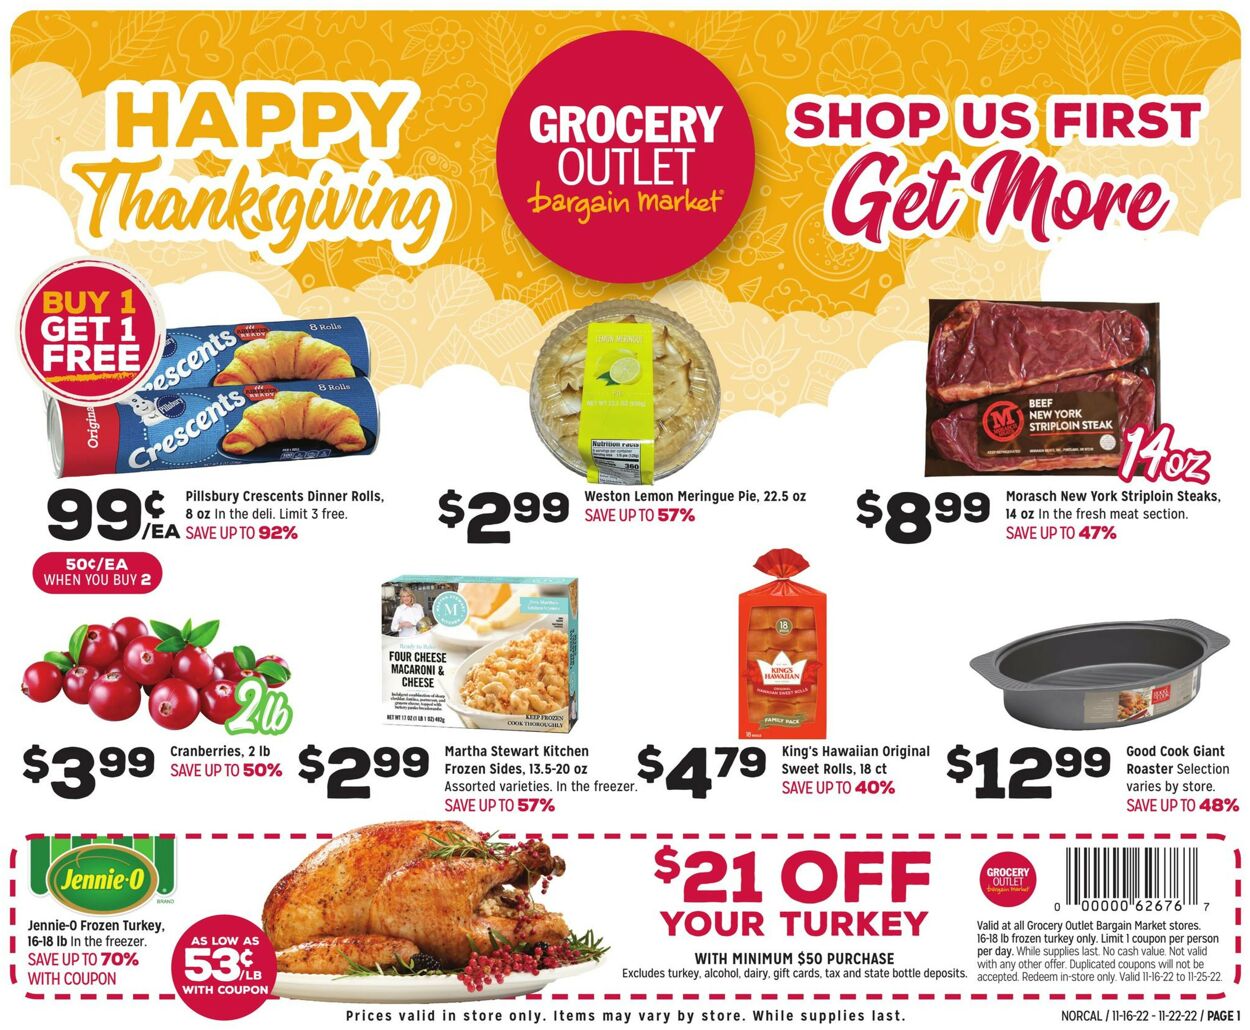 Grocery Outlet Weekly Ad Circular - valid 11/16-11/23/2022